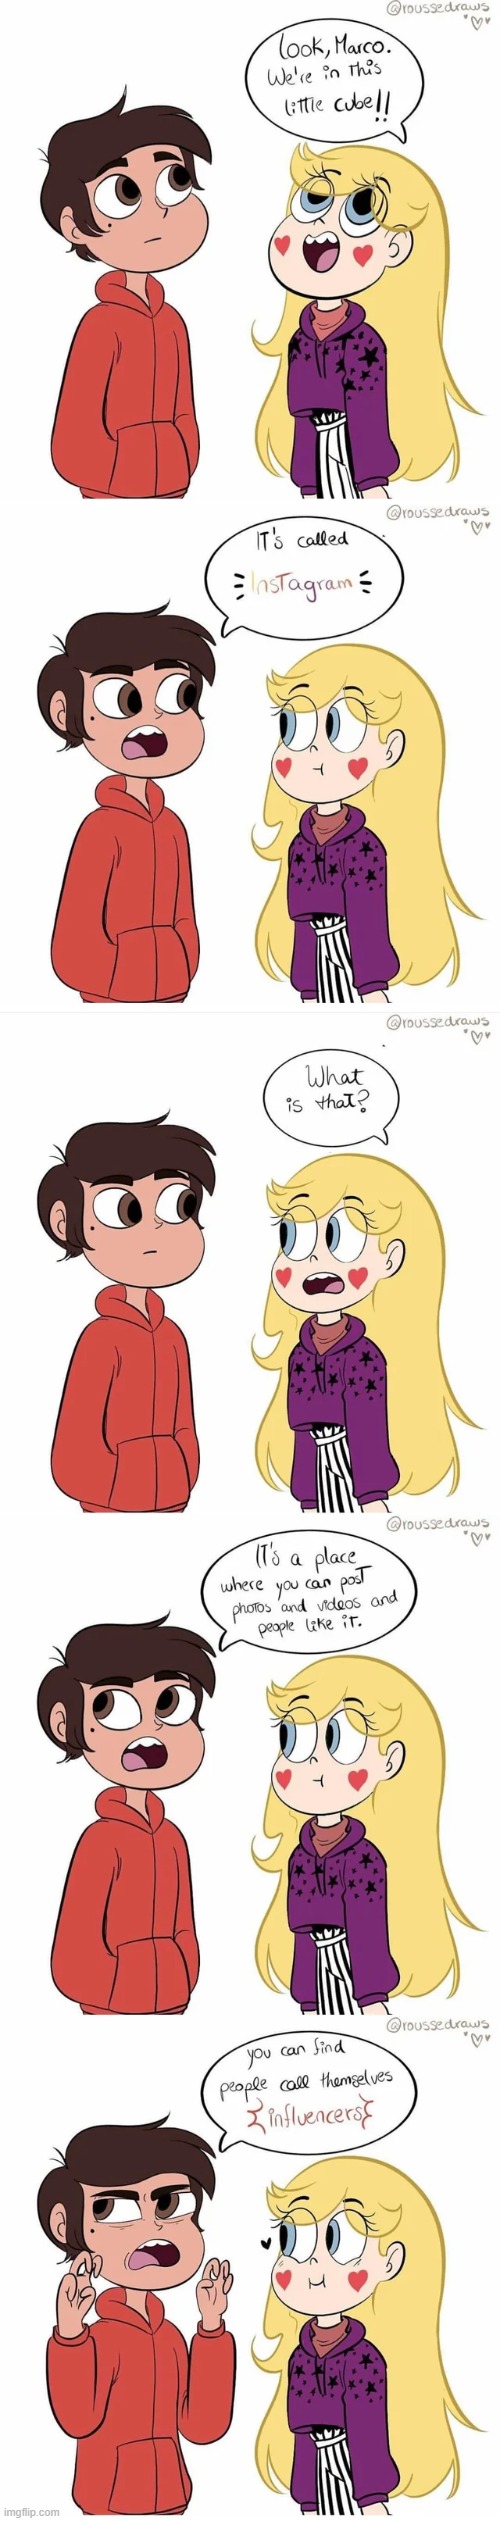 Star discovers Instagram | image tagged in comics/cartoons,star vs the forces of evil,instagram | made w/ Imgflip meme maker